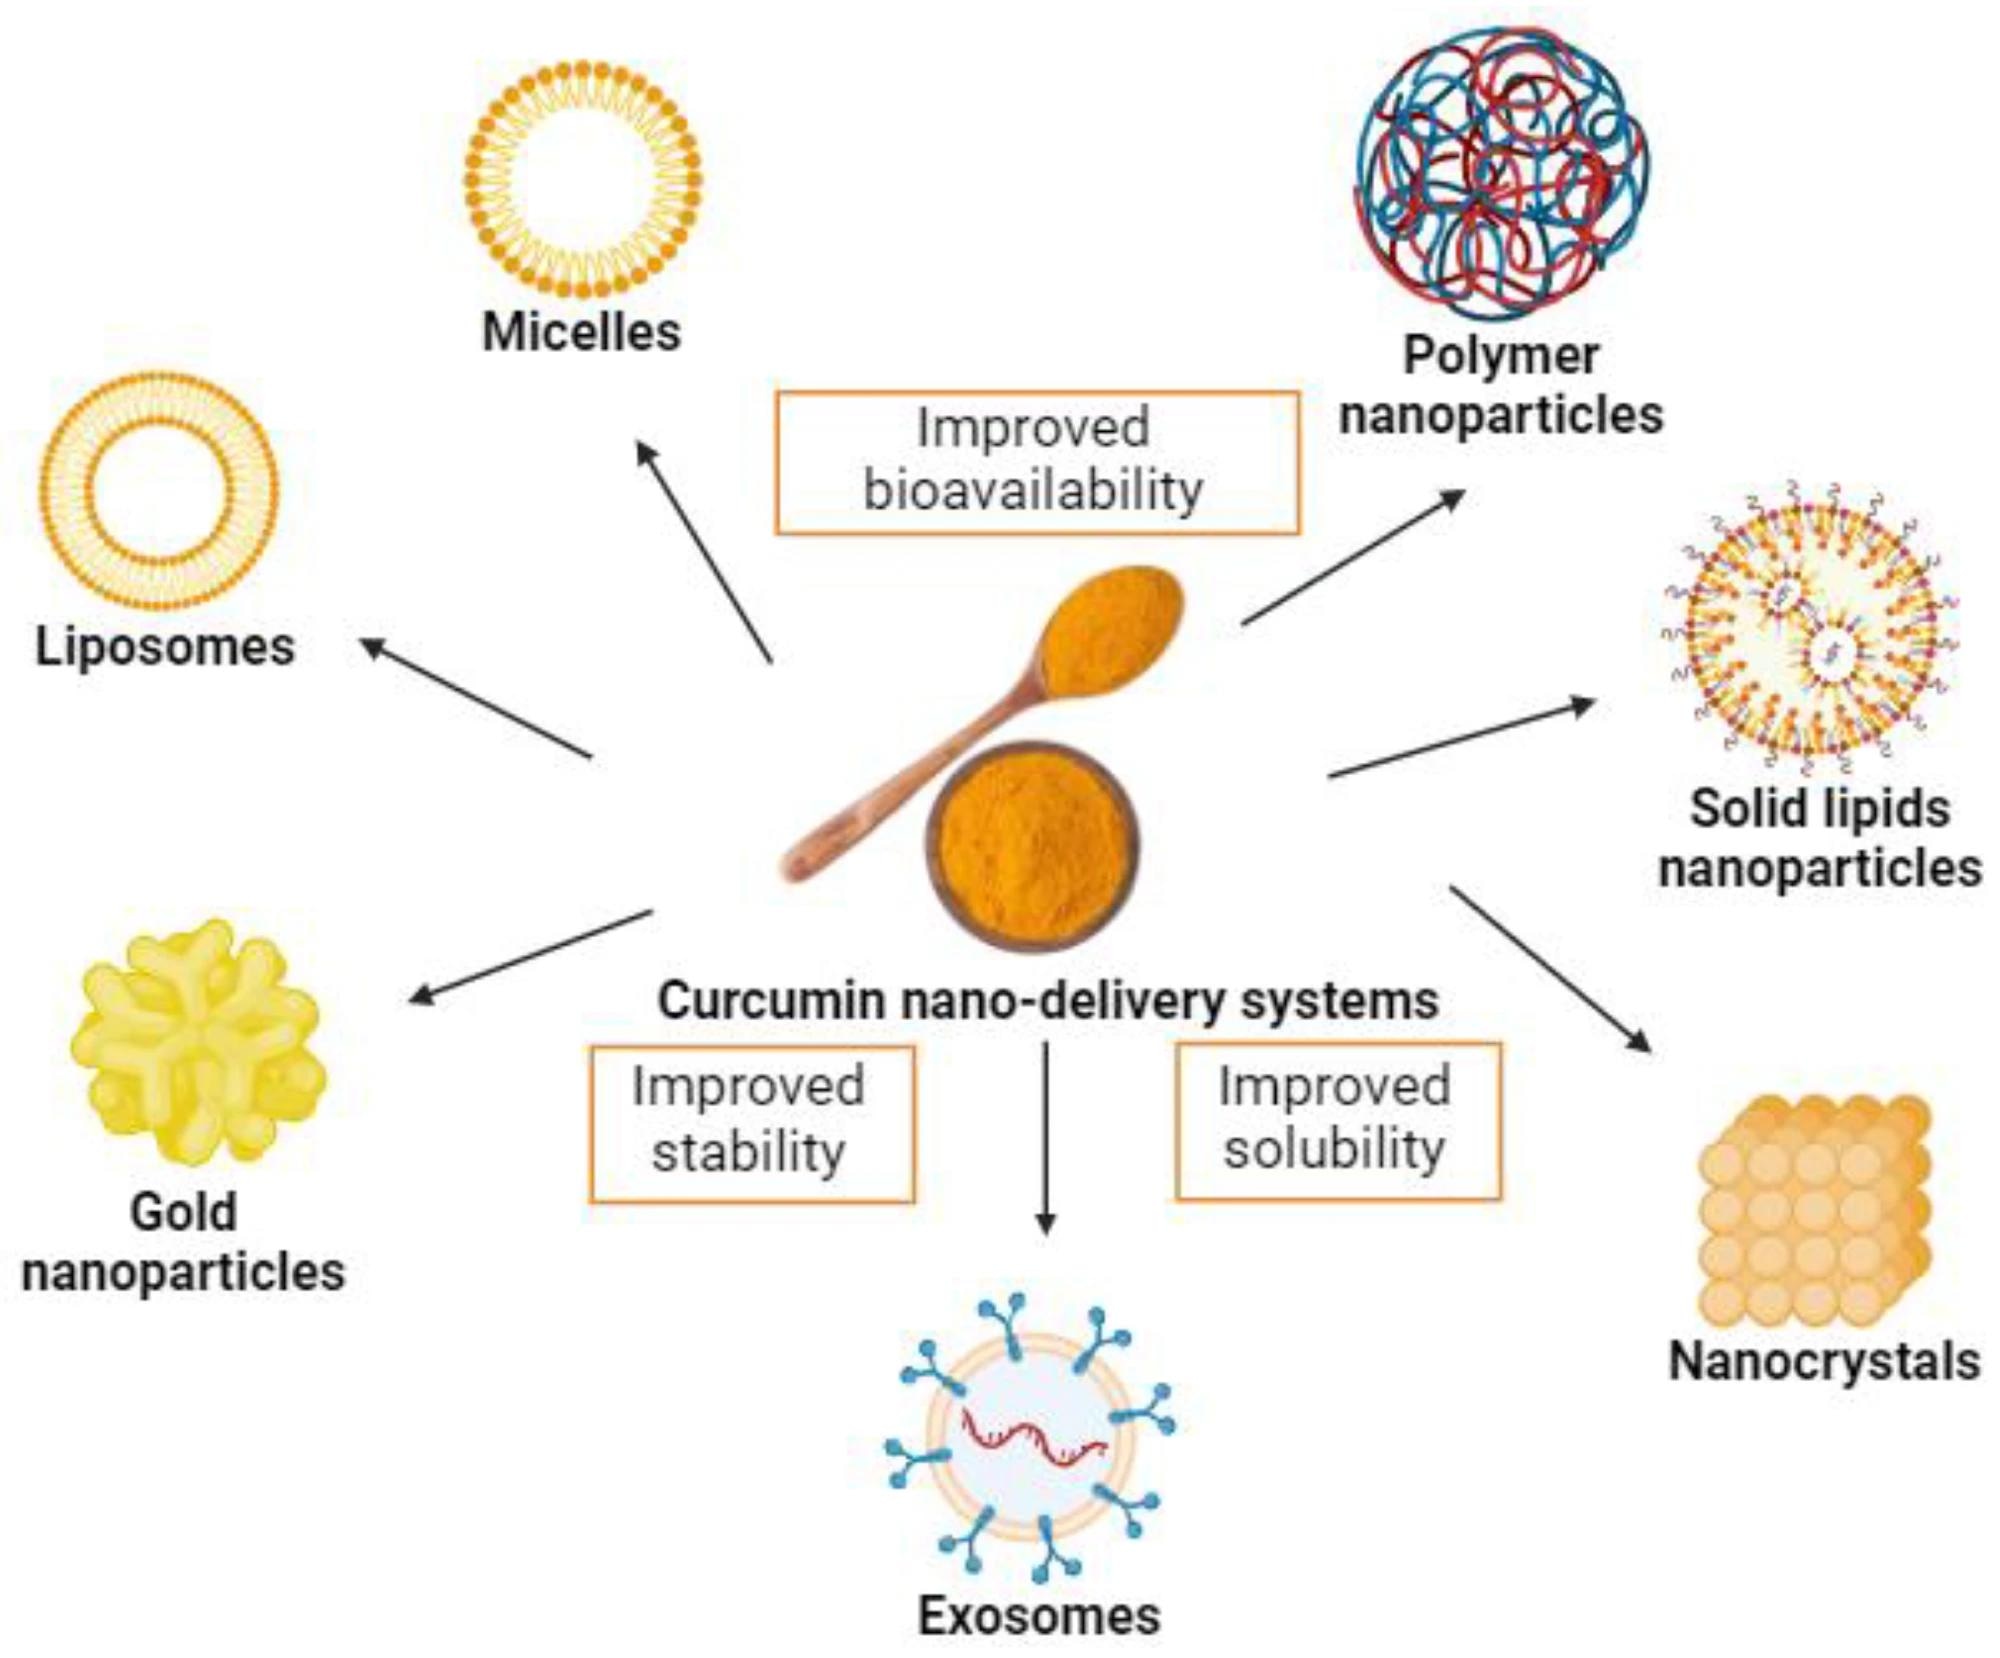 Examples of curcumin nanodelivery systems.